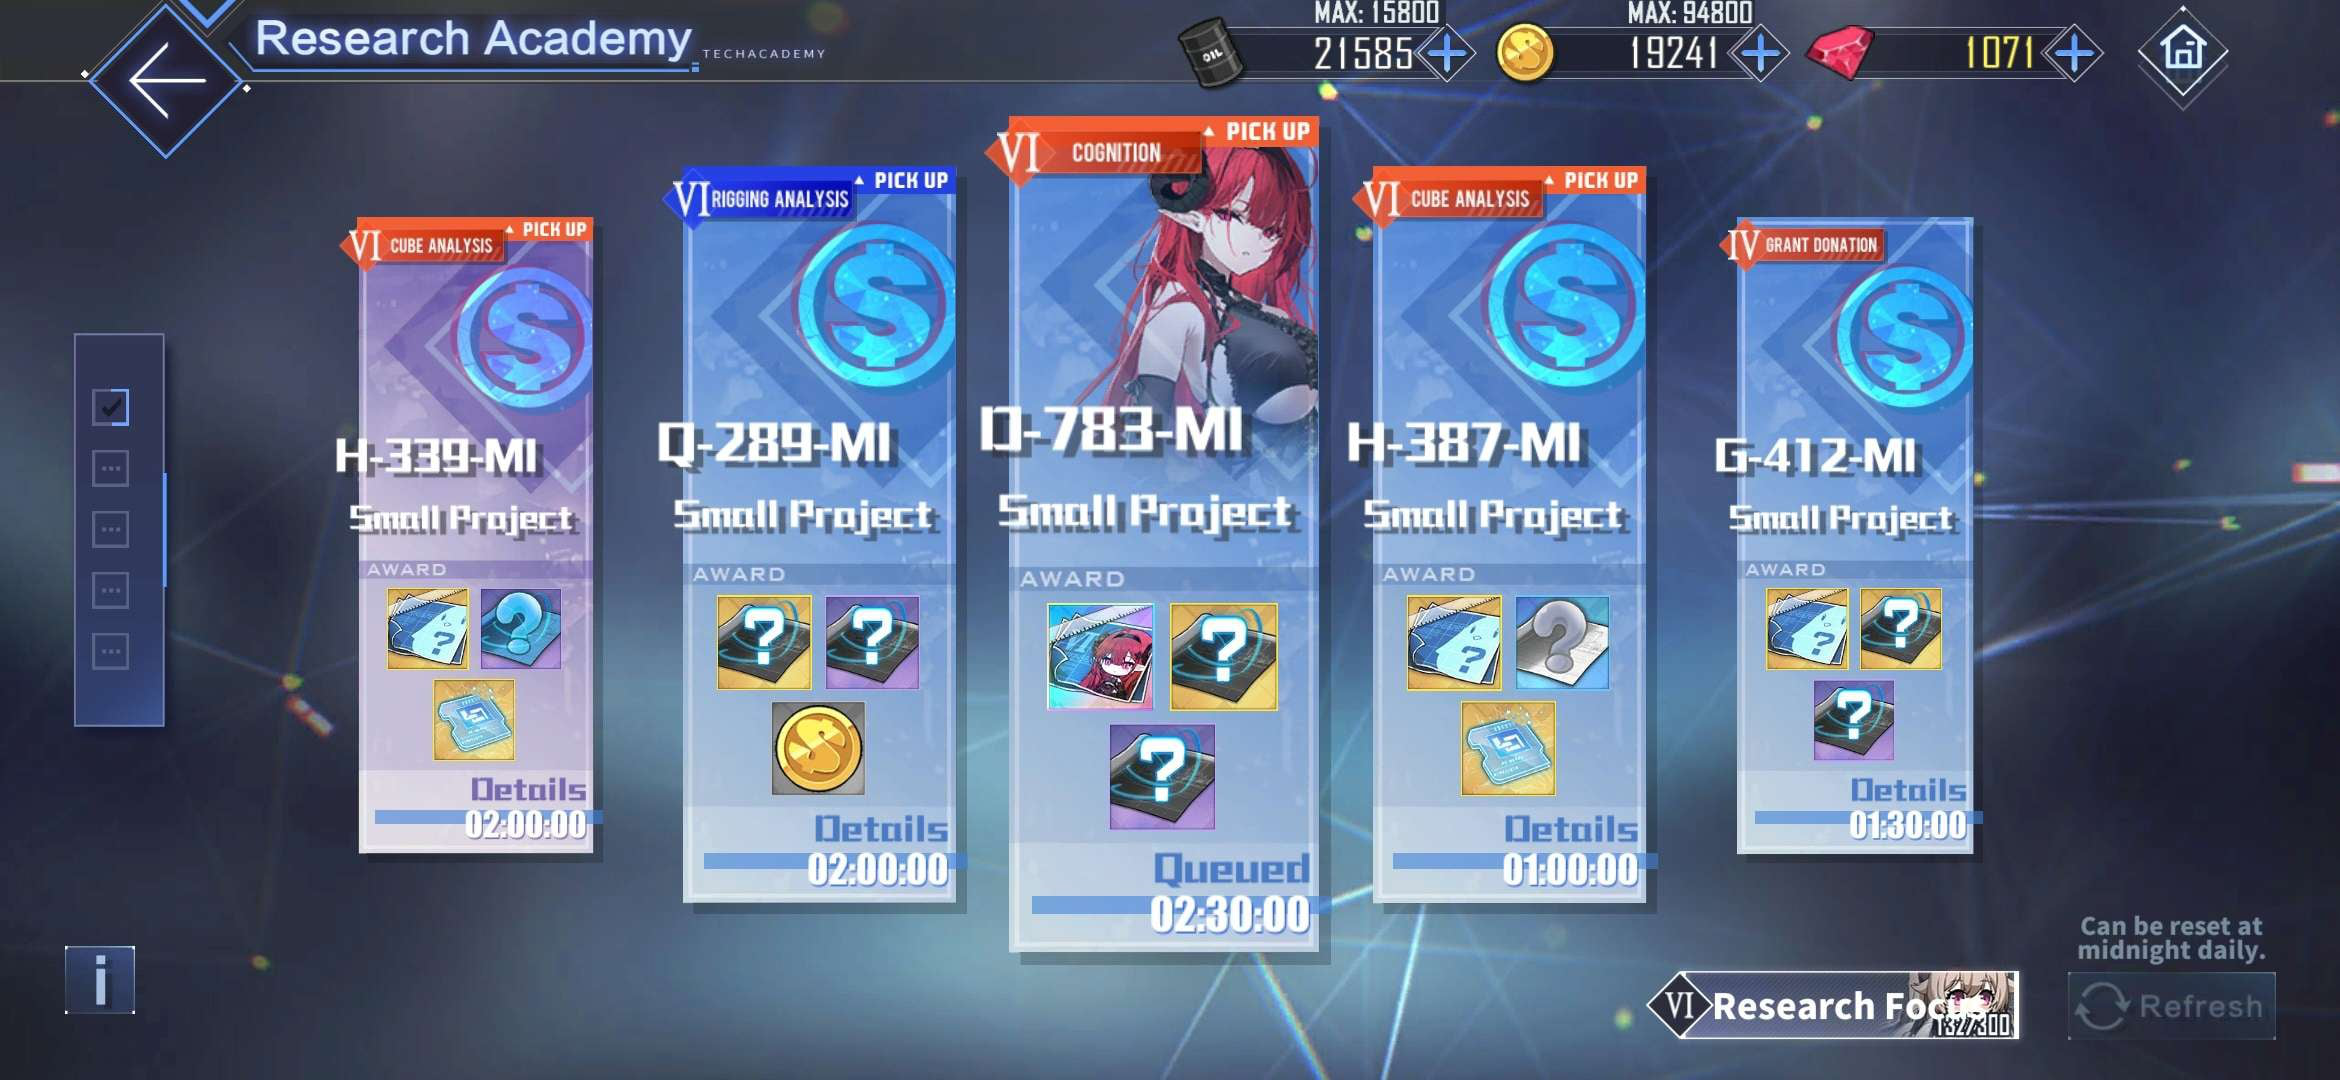 Research Academy UI